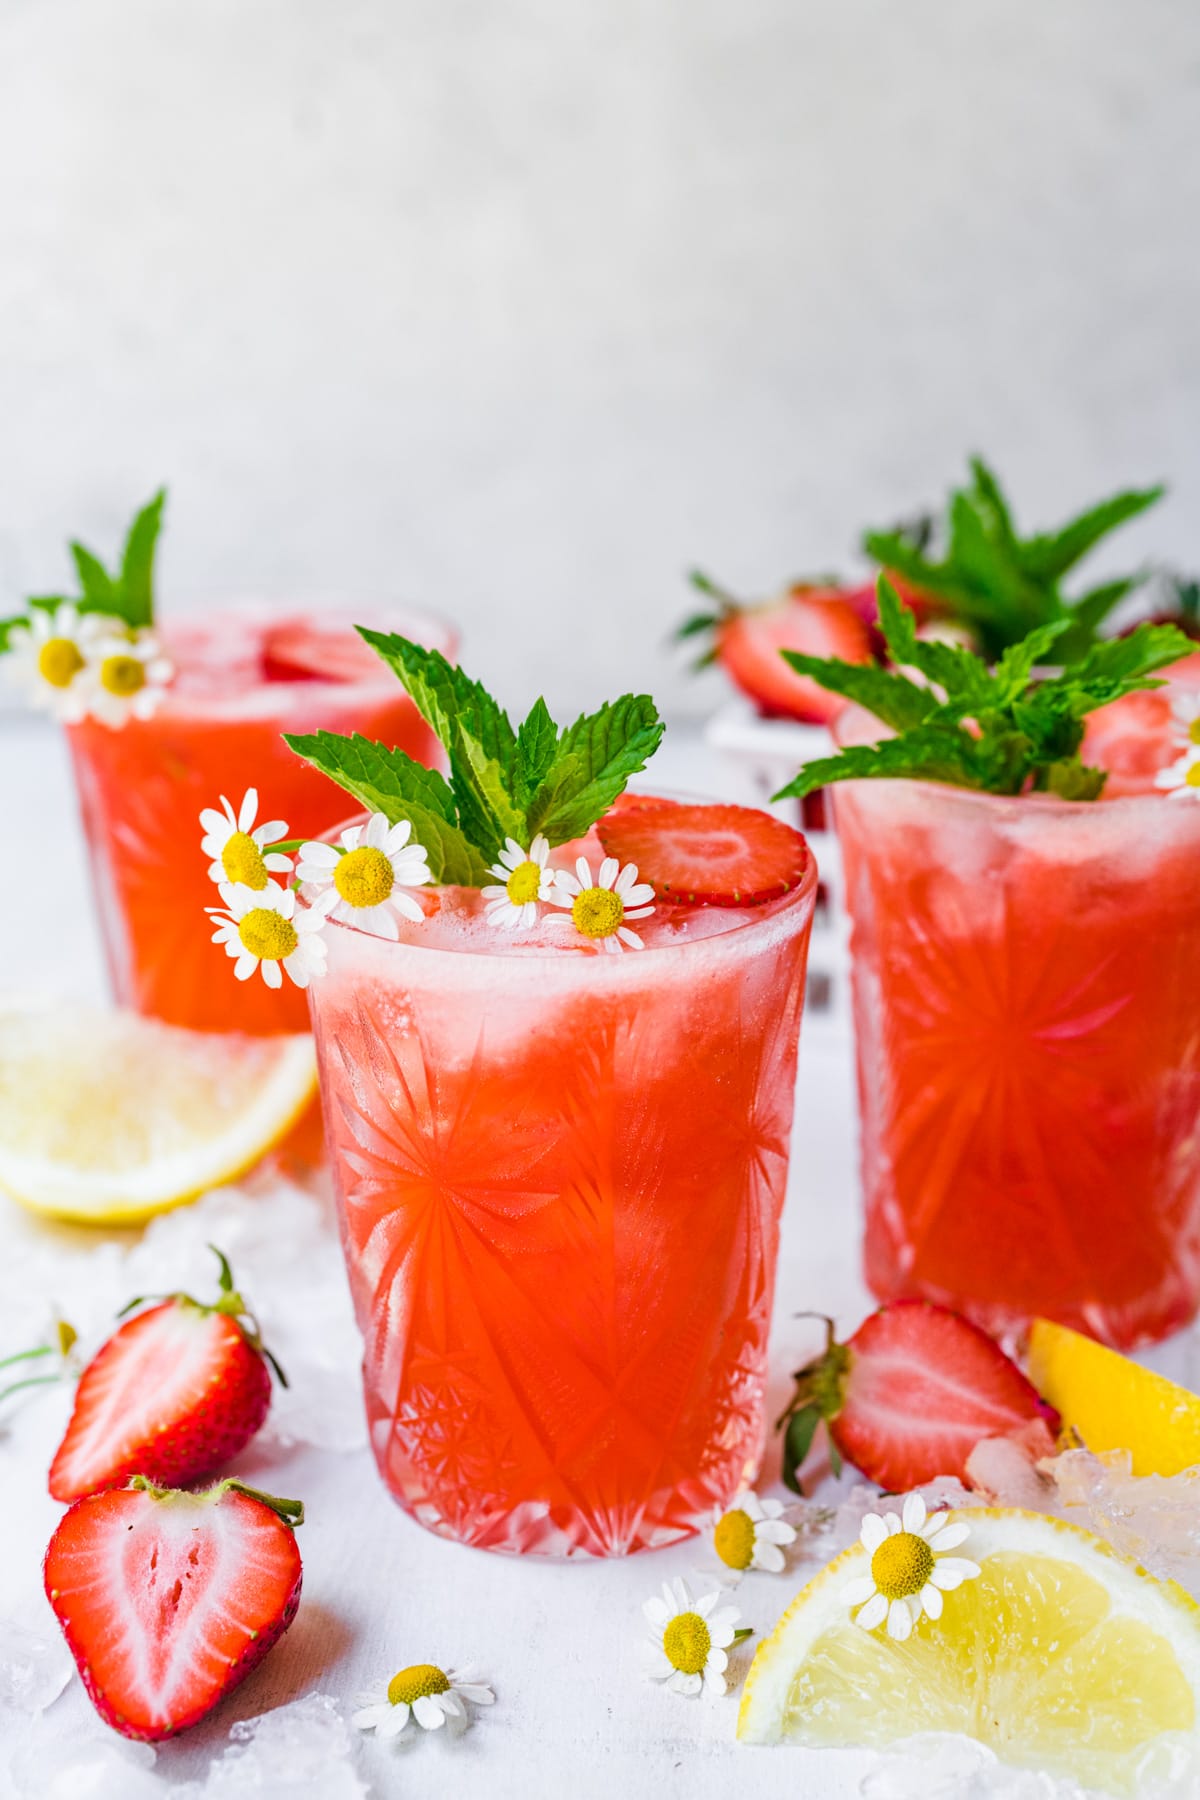 The finished strawberry mocktails with mint and floral garnish.